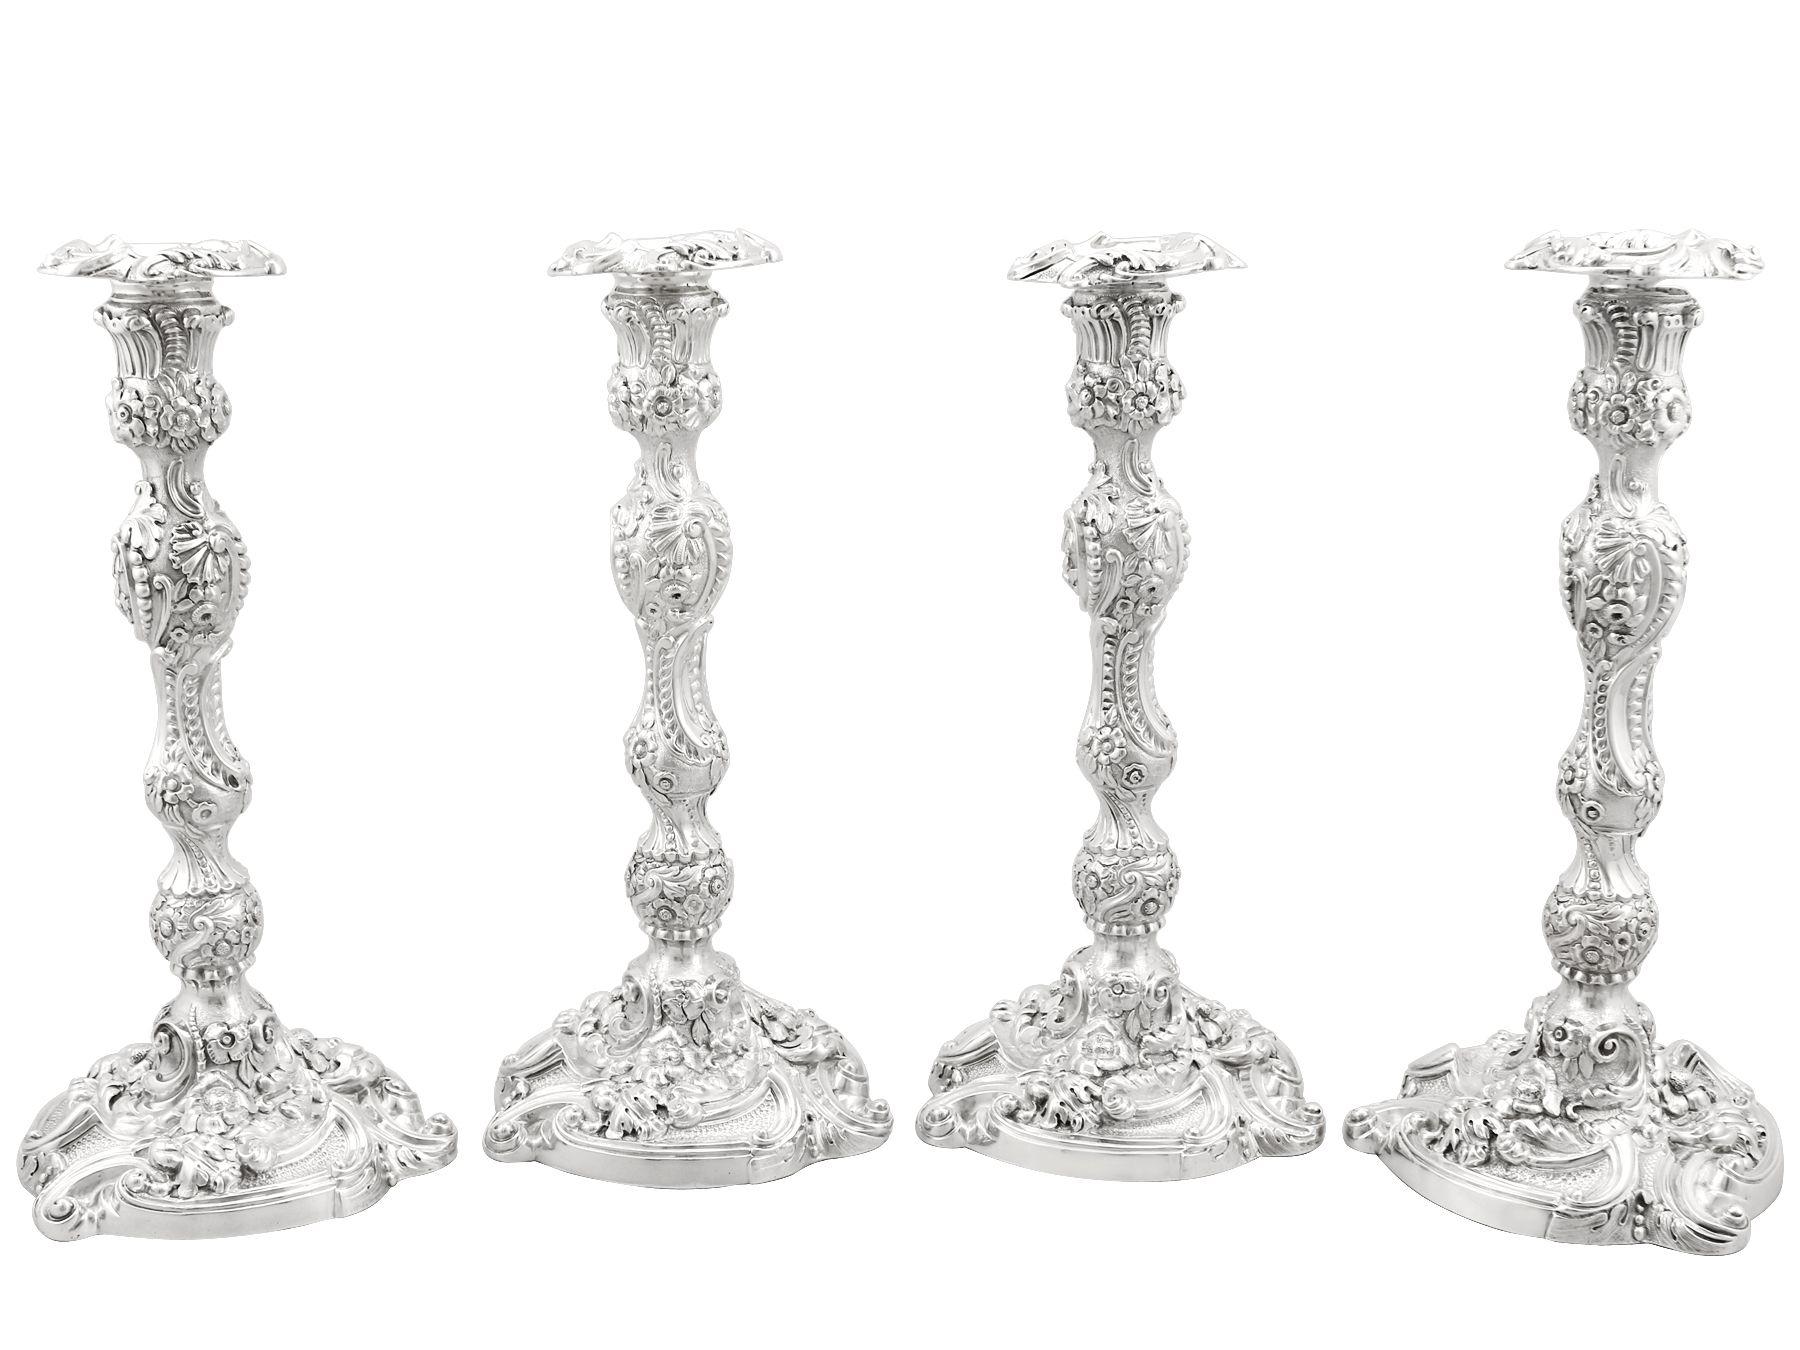 A magnificent, fine and impressive, set of four antique George IV English sterling silver candlesticks; an addition to our antique silverware collection.

These magnificent antique George IV cast sterling silver candlesticks have a baluster shaped